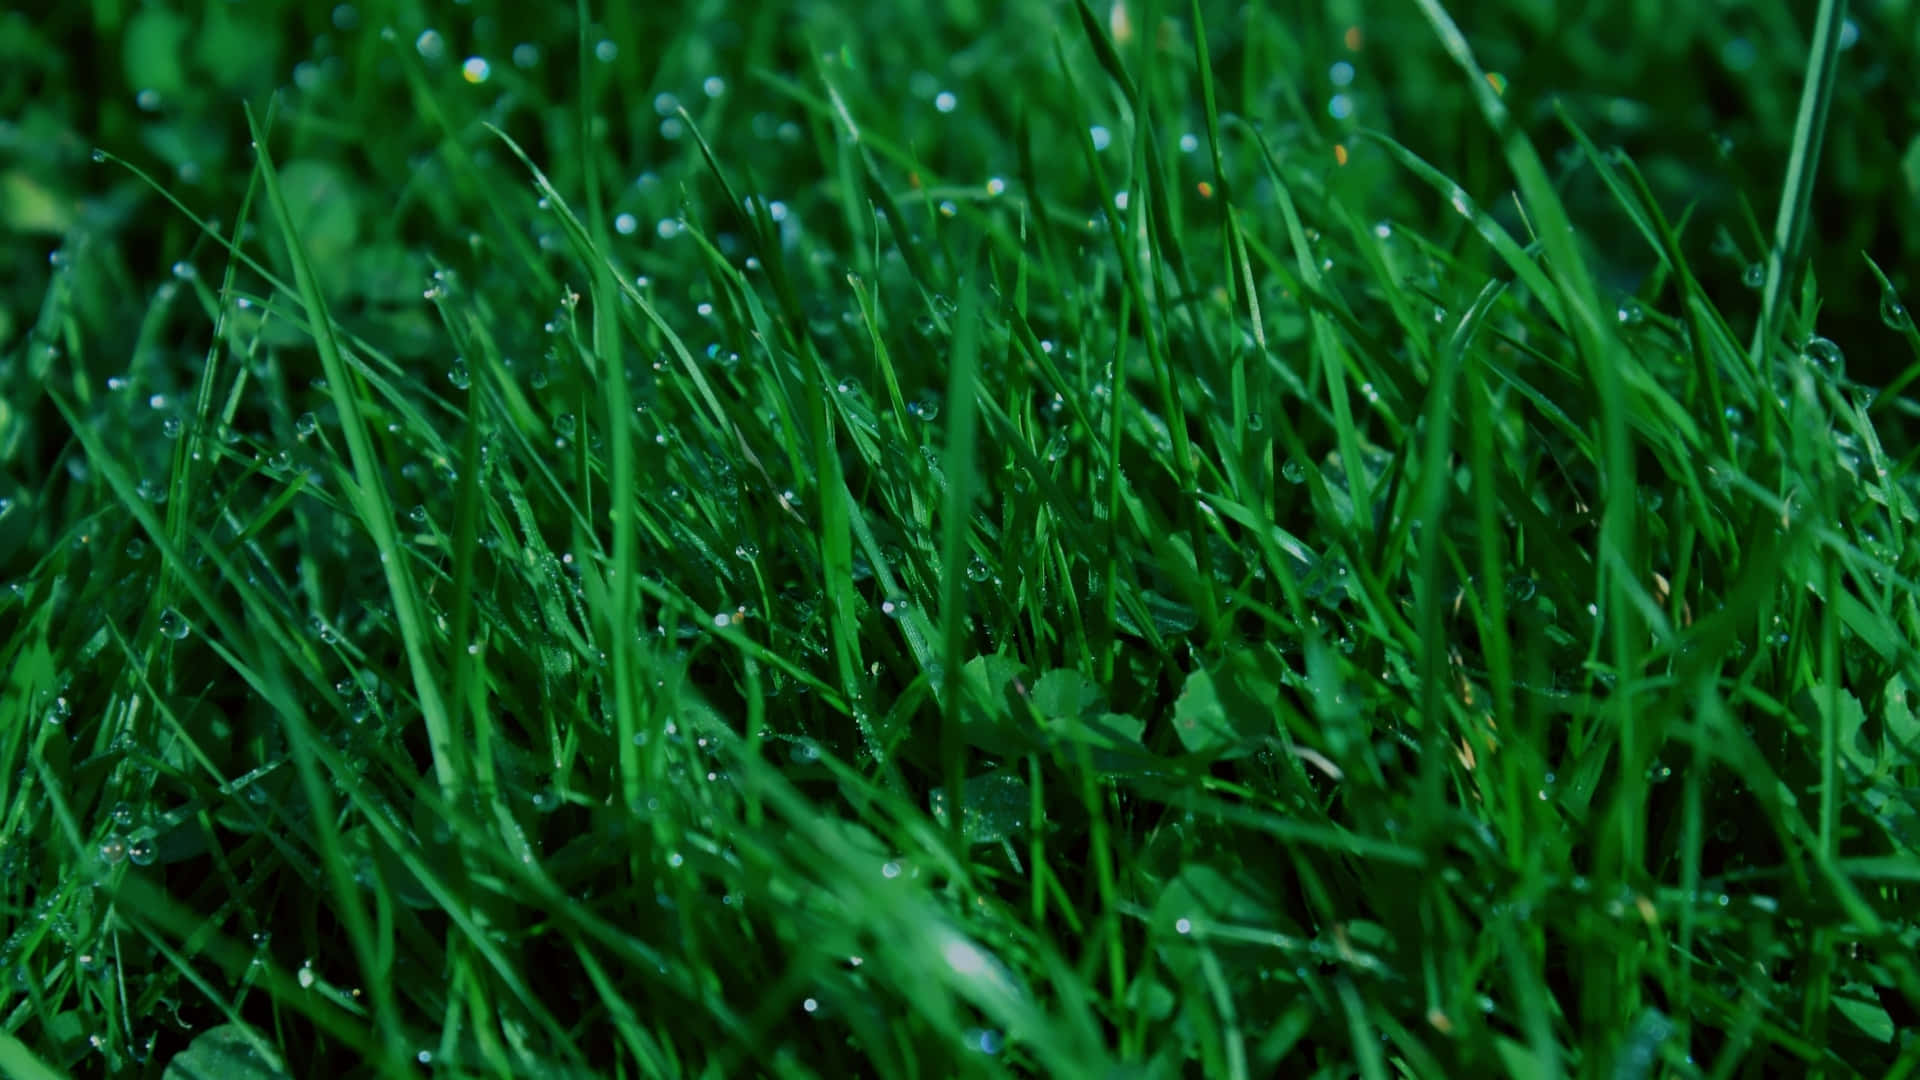 Green Grass Rainfall Water Droplets Picture